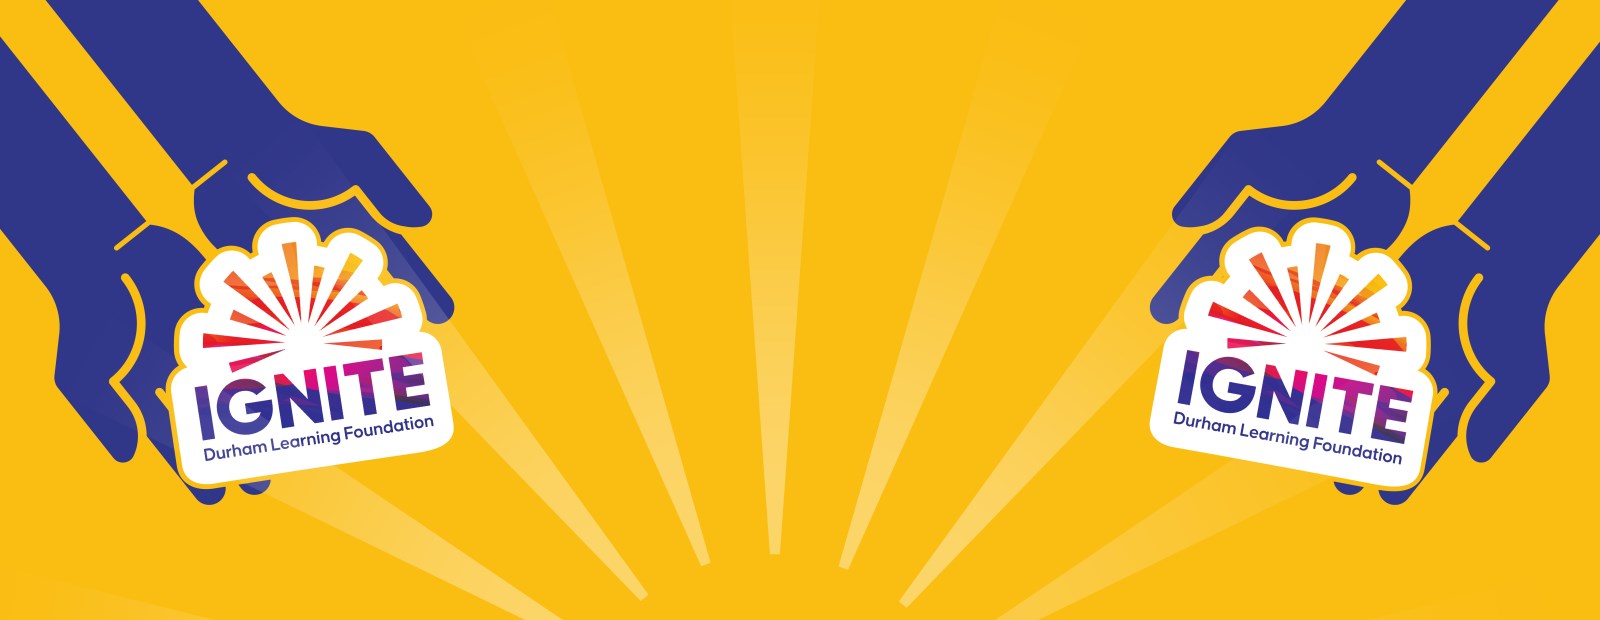 Ignite Durham Learning Foundation logo with bright gold background